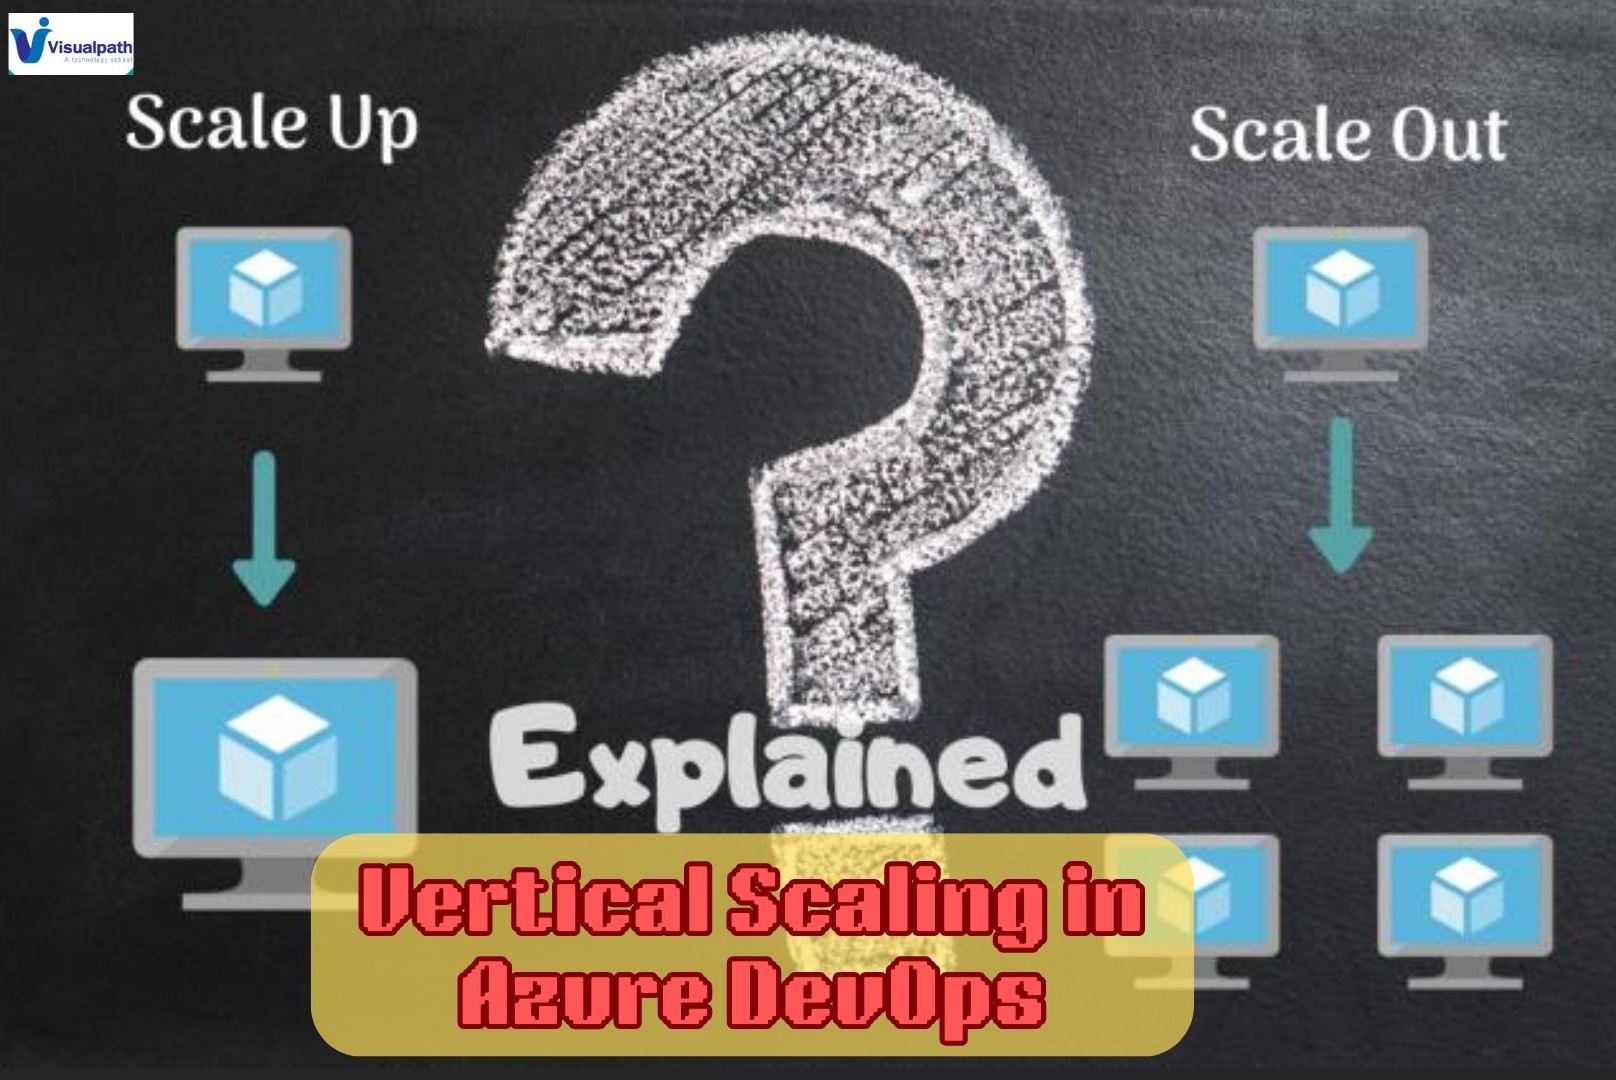 Vertical Scaling in Azure DevOps: Scale-Up and Scale-Out Strategies